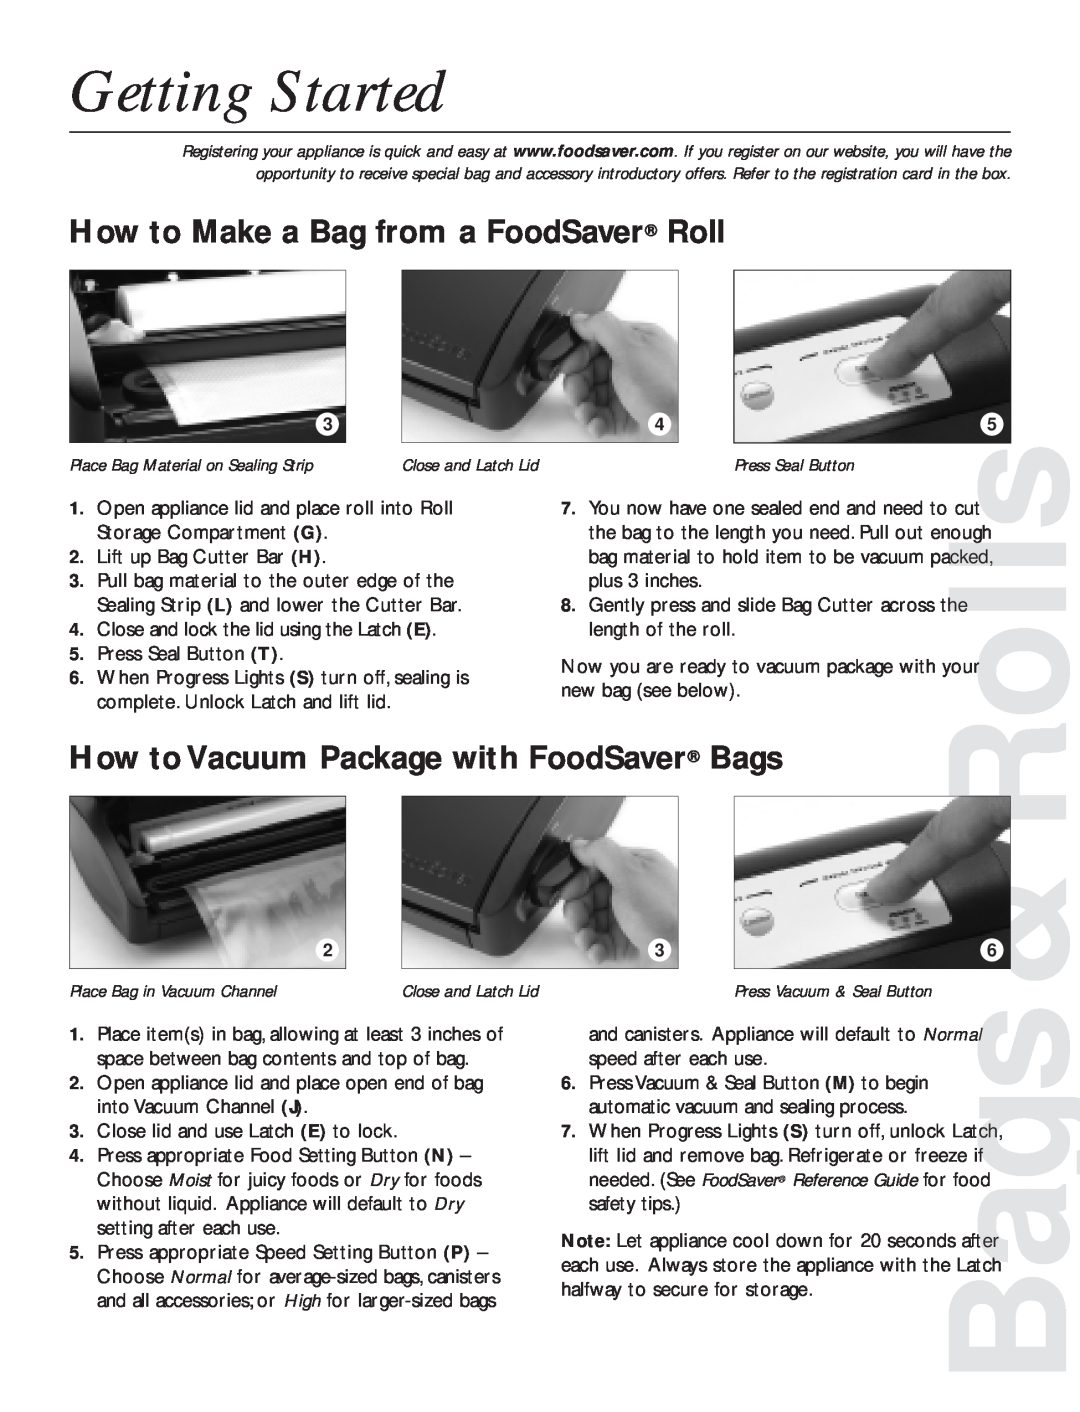 FoodSaver V2820 Getting Started, How to Make a Bag from a FoodSaver Roll, How to Vacuum Package with FoodSaver Bags, Rolls 